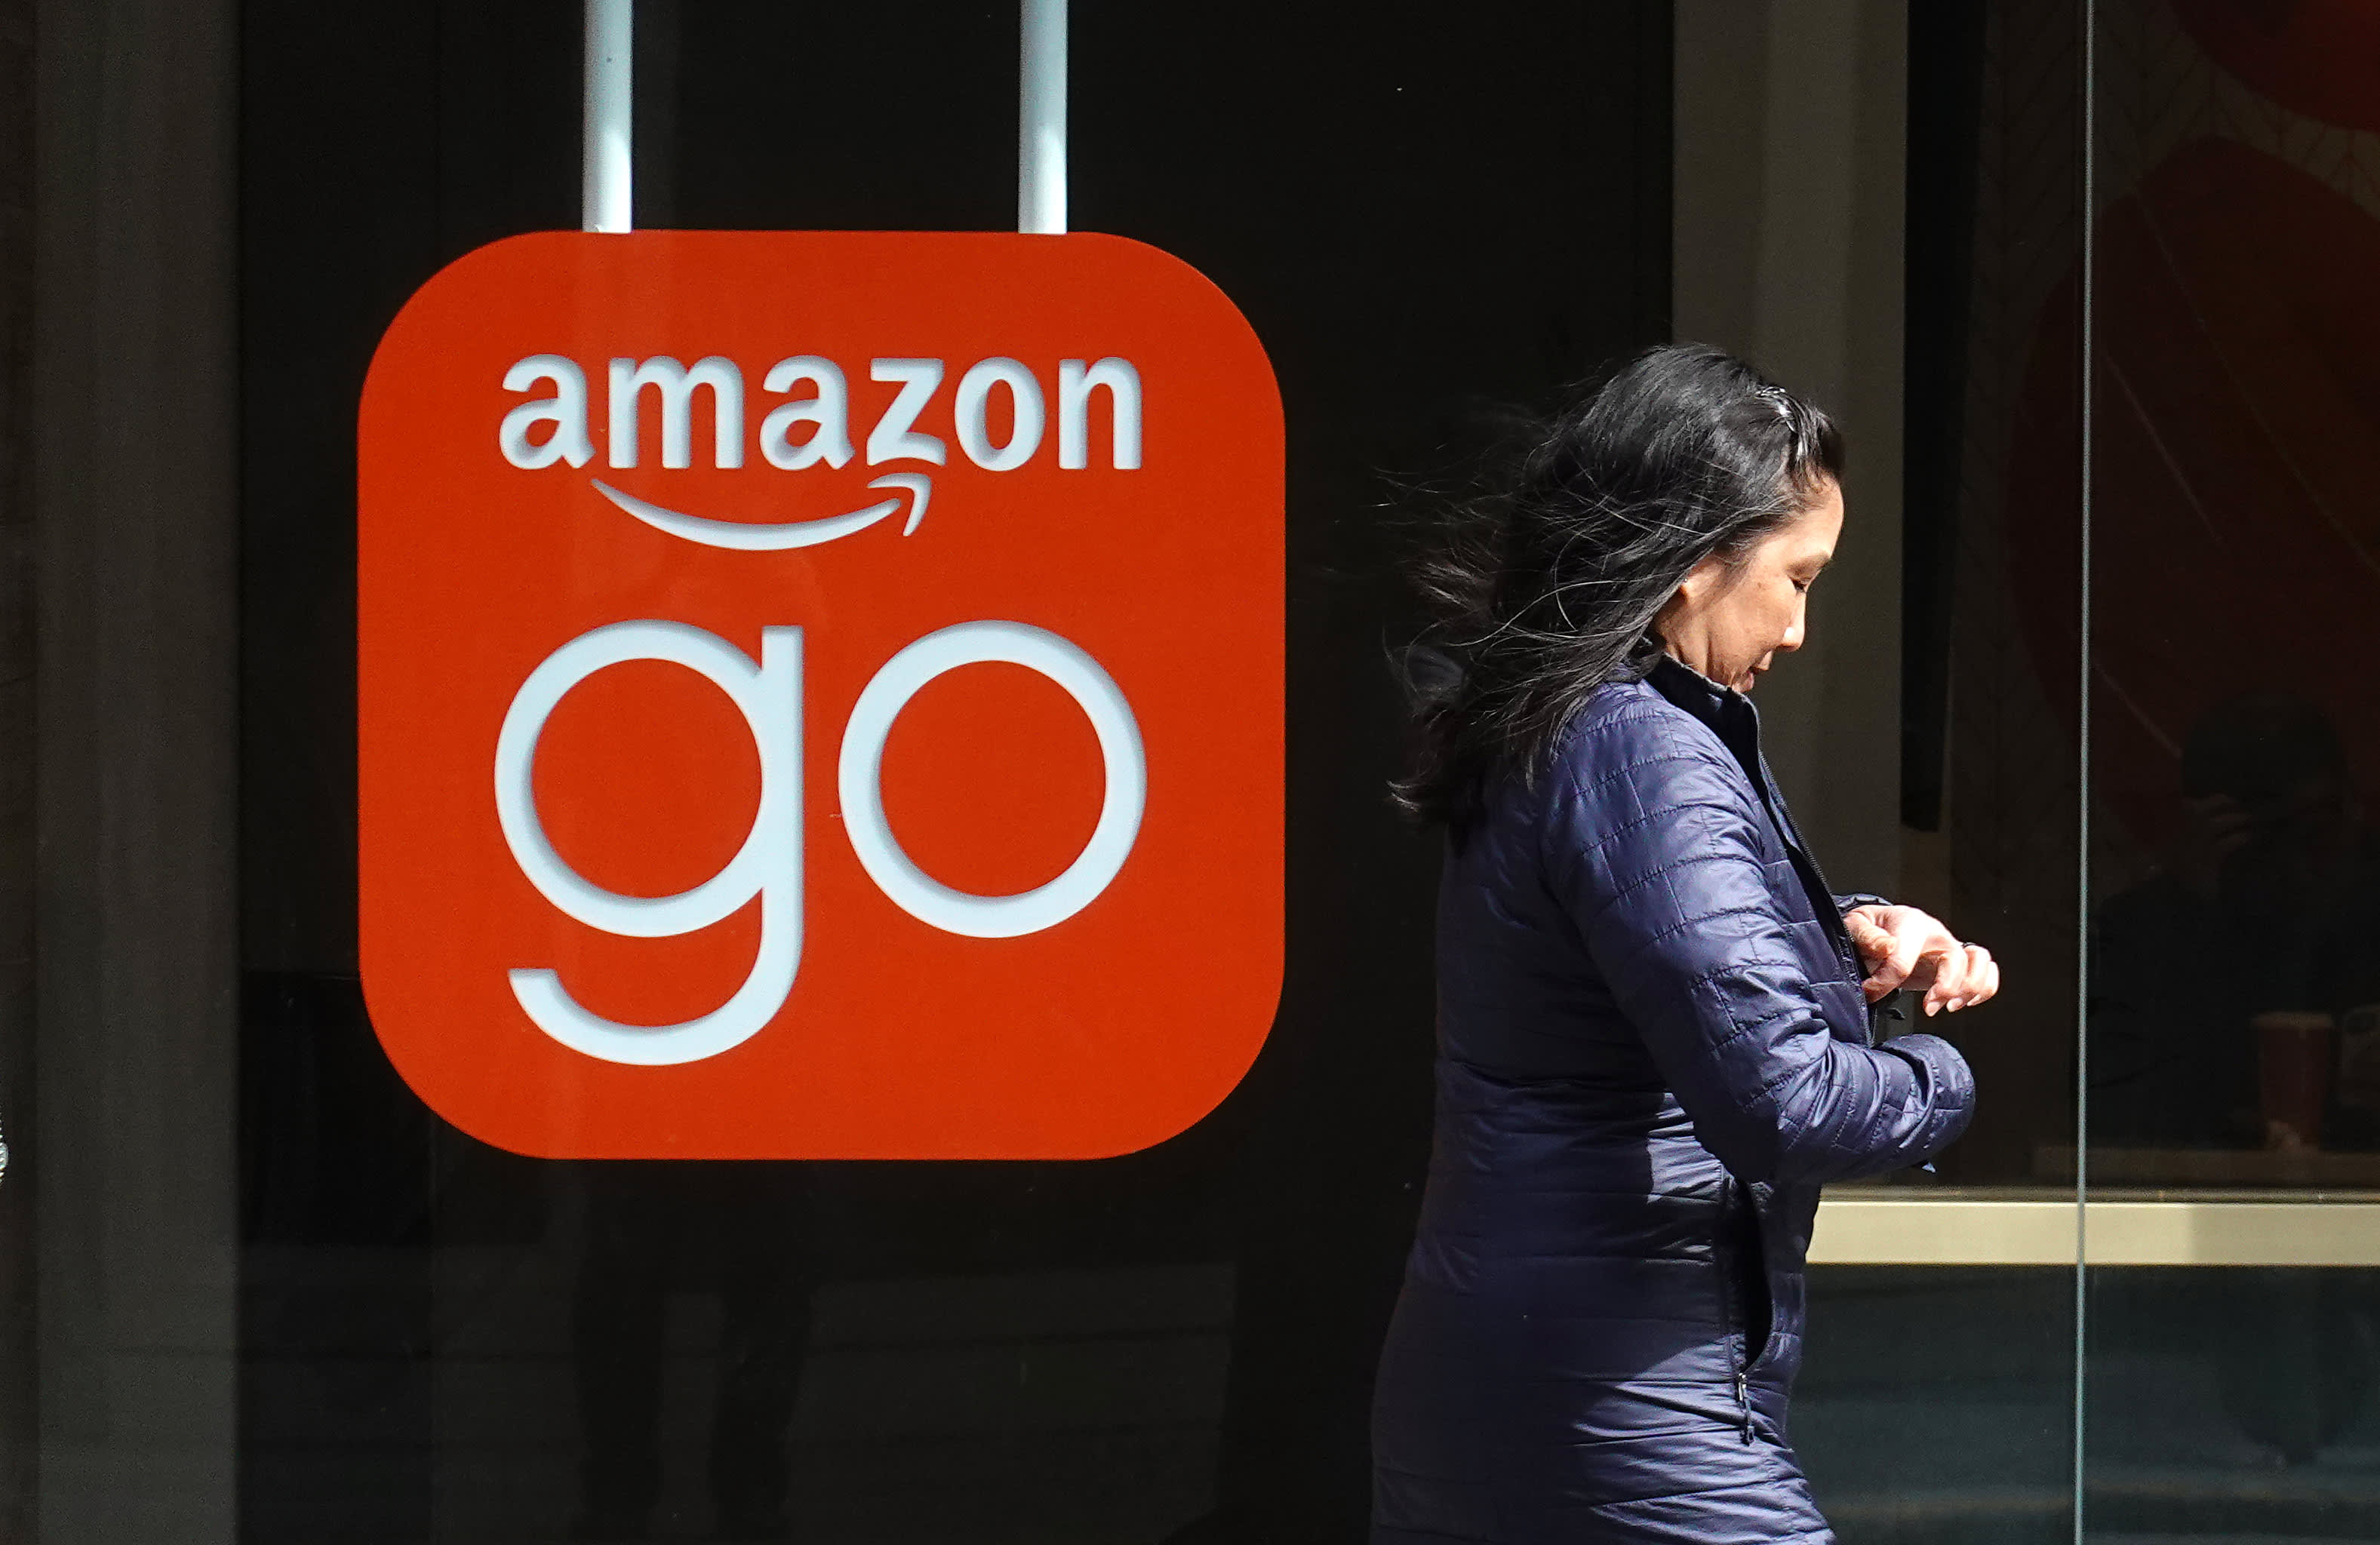 Goldman Sachs loves Uber, Meta and Amazon — and ranks them in order of preference